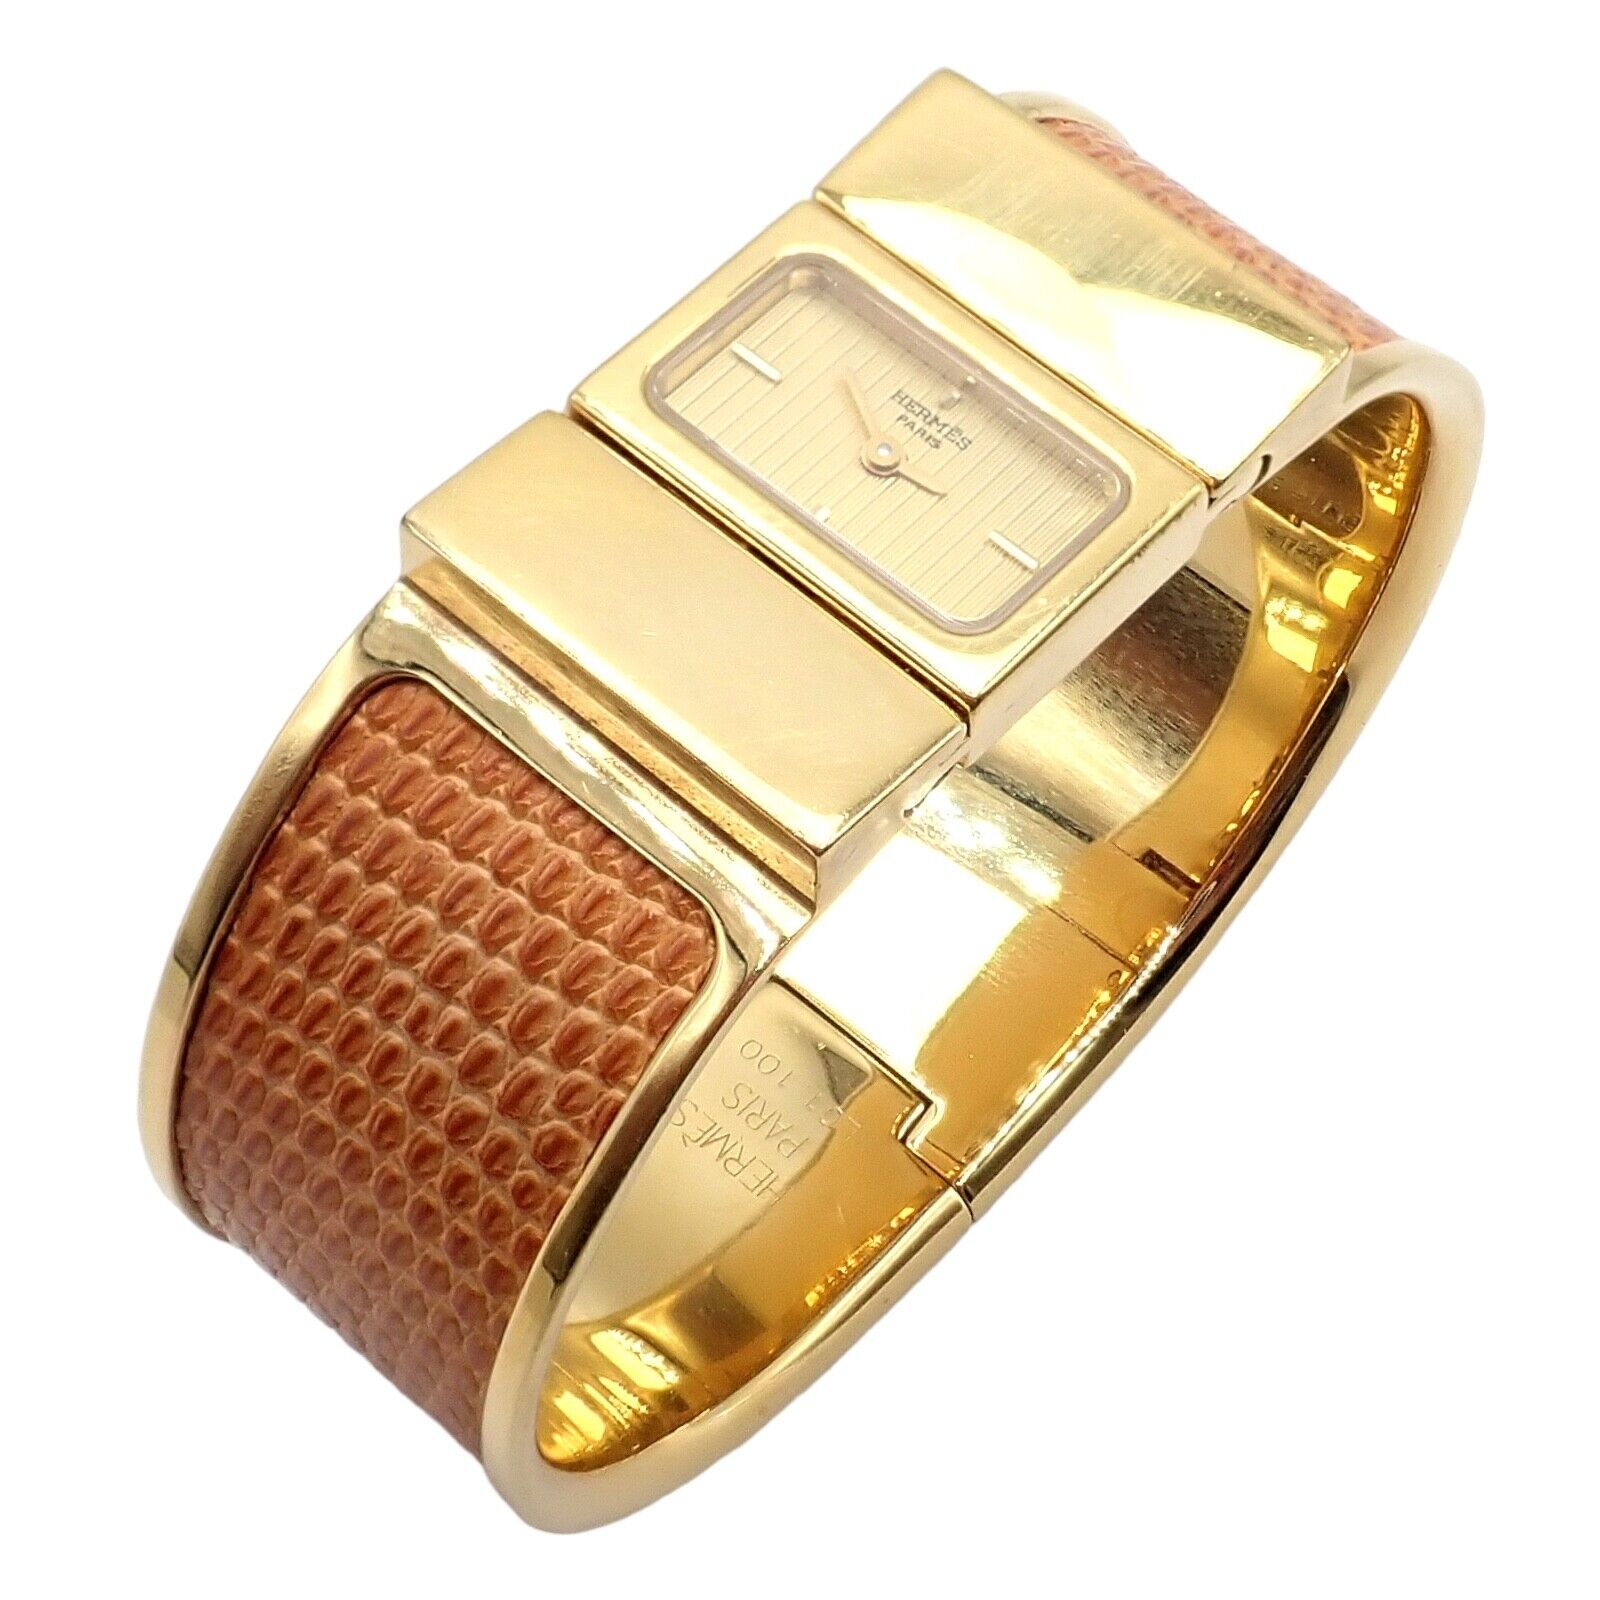 Hermes Jewelry & Watches:Watches, Parts & Accessories:Watches:Wristwatches Hermes Loquet Gold Hardware Snake Embossed Ladies Watch